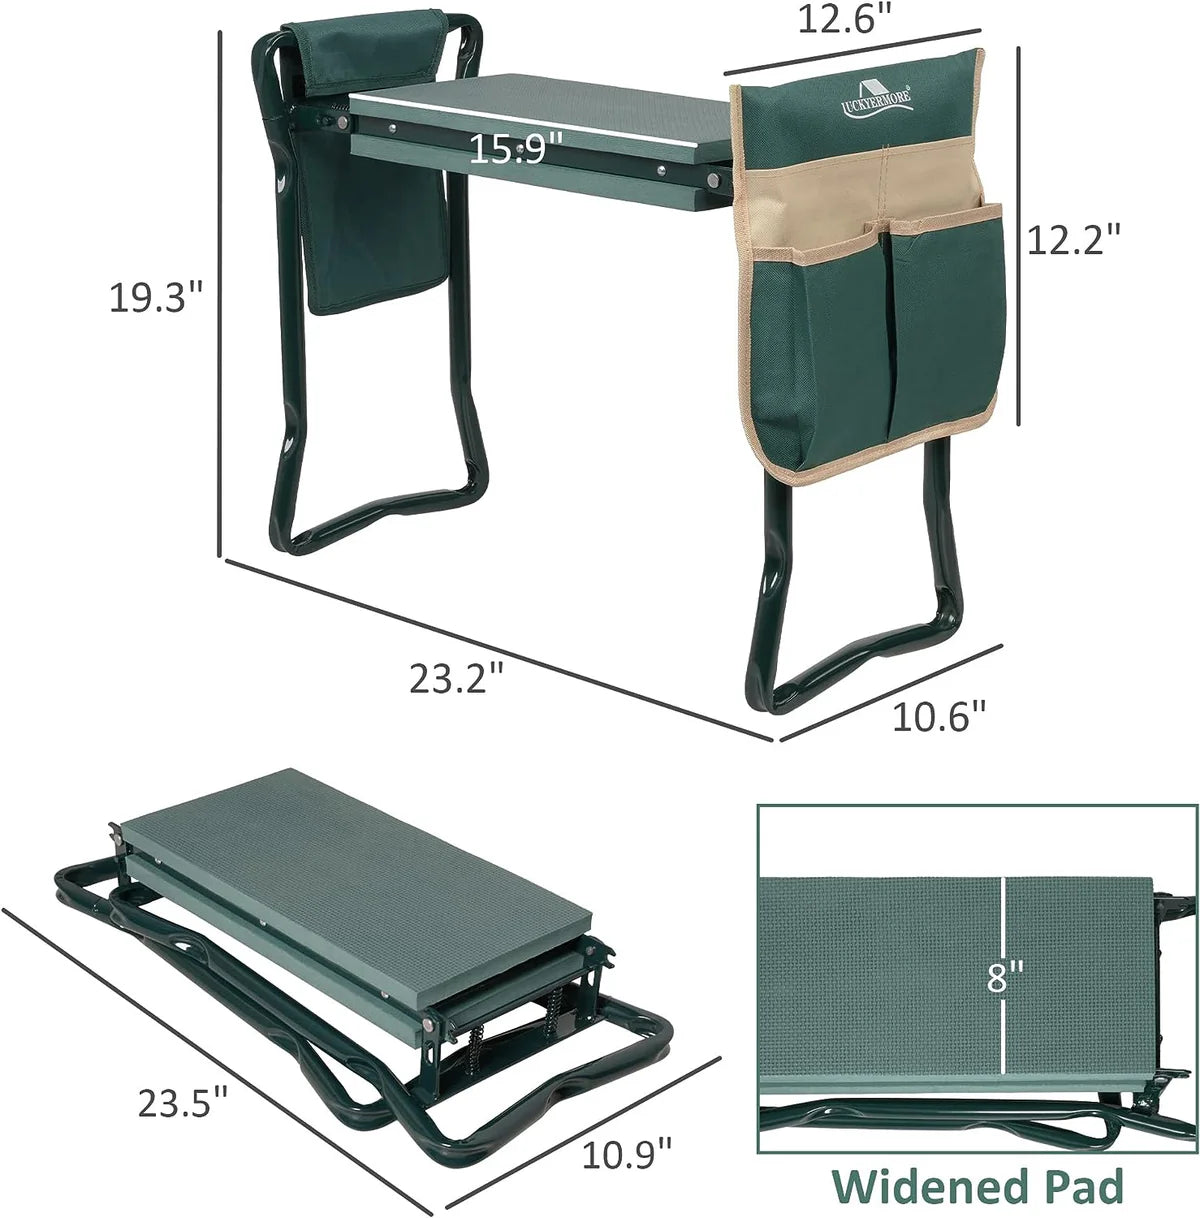 Widen Garden Kneeler Folding Garden Stools Bench and Seat with 2 Tool Pouches